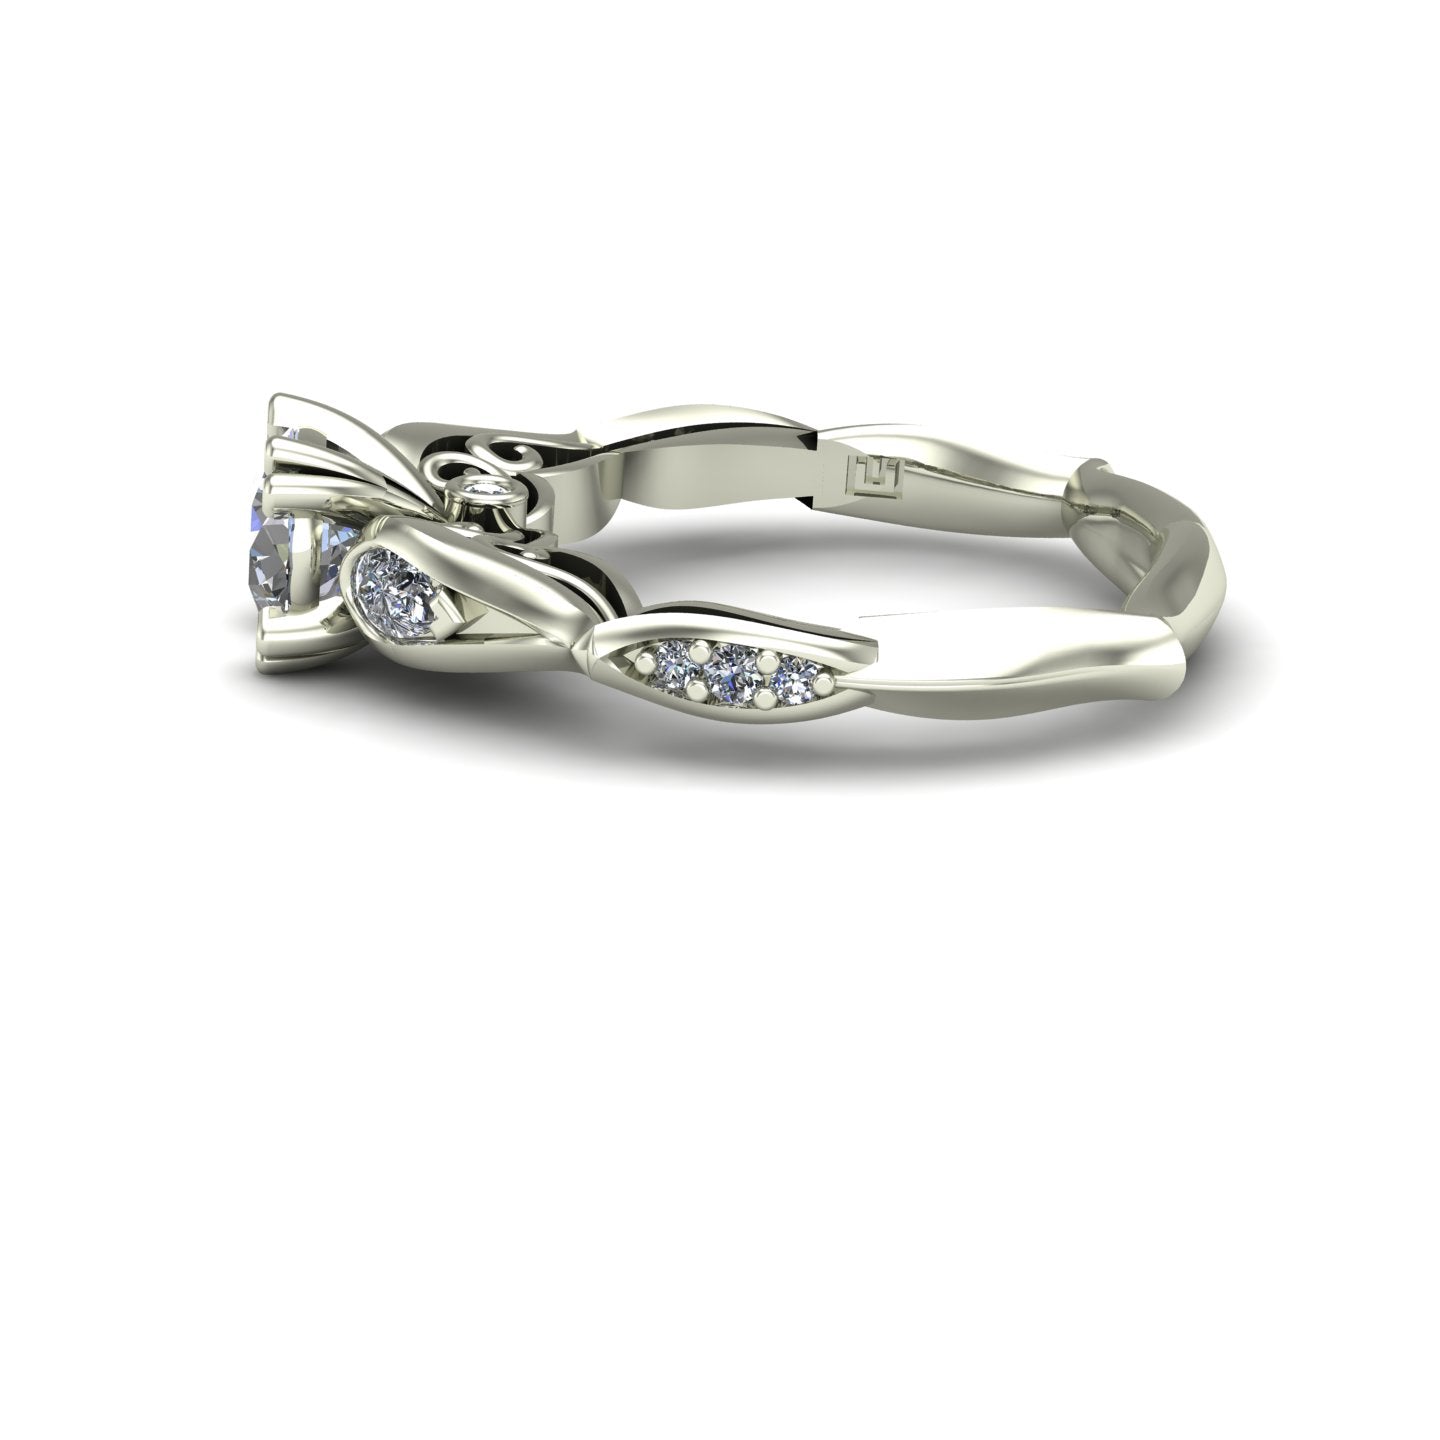 1ct diamond engagement ring with pear sides in 18k white gold - Charles Babb Designs - side view